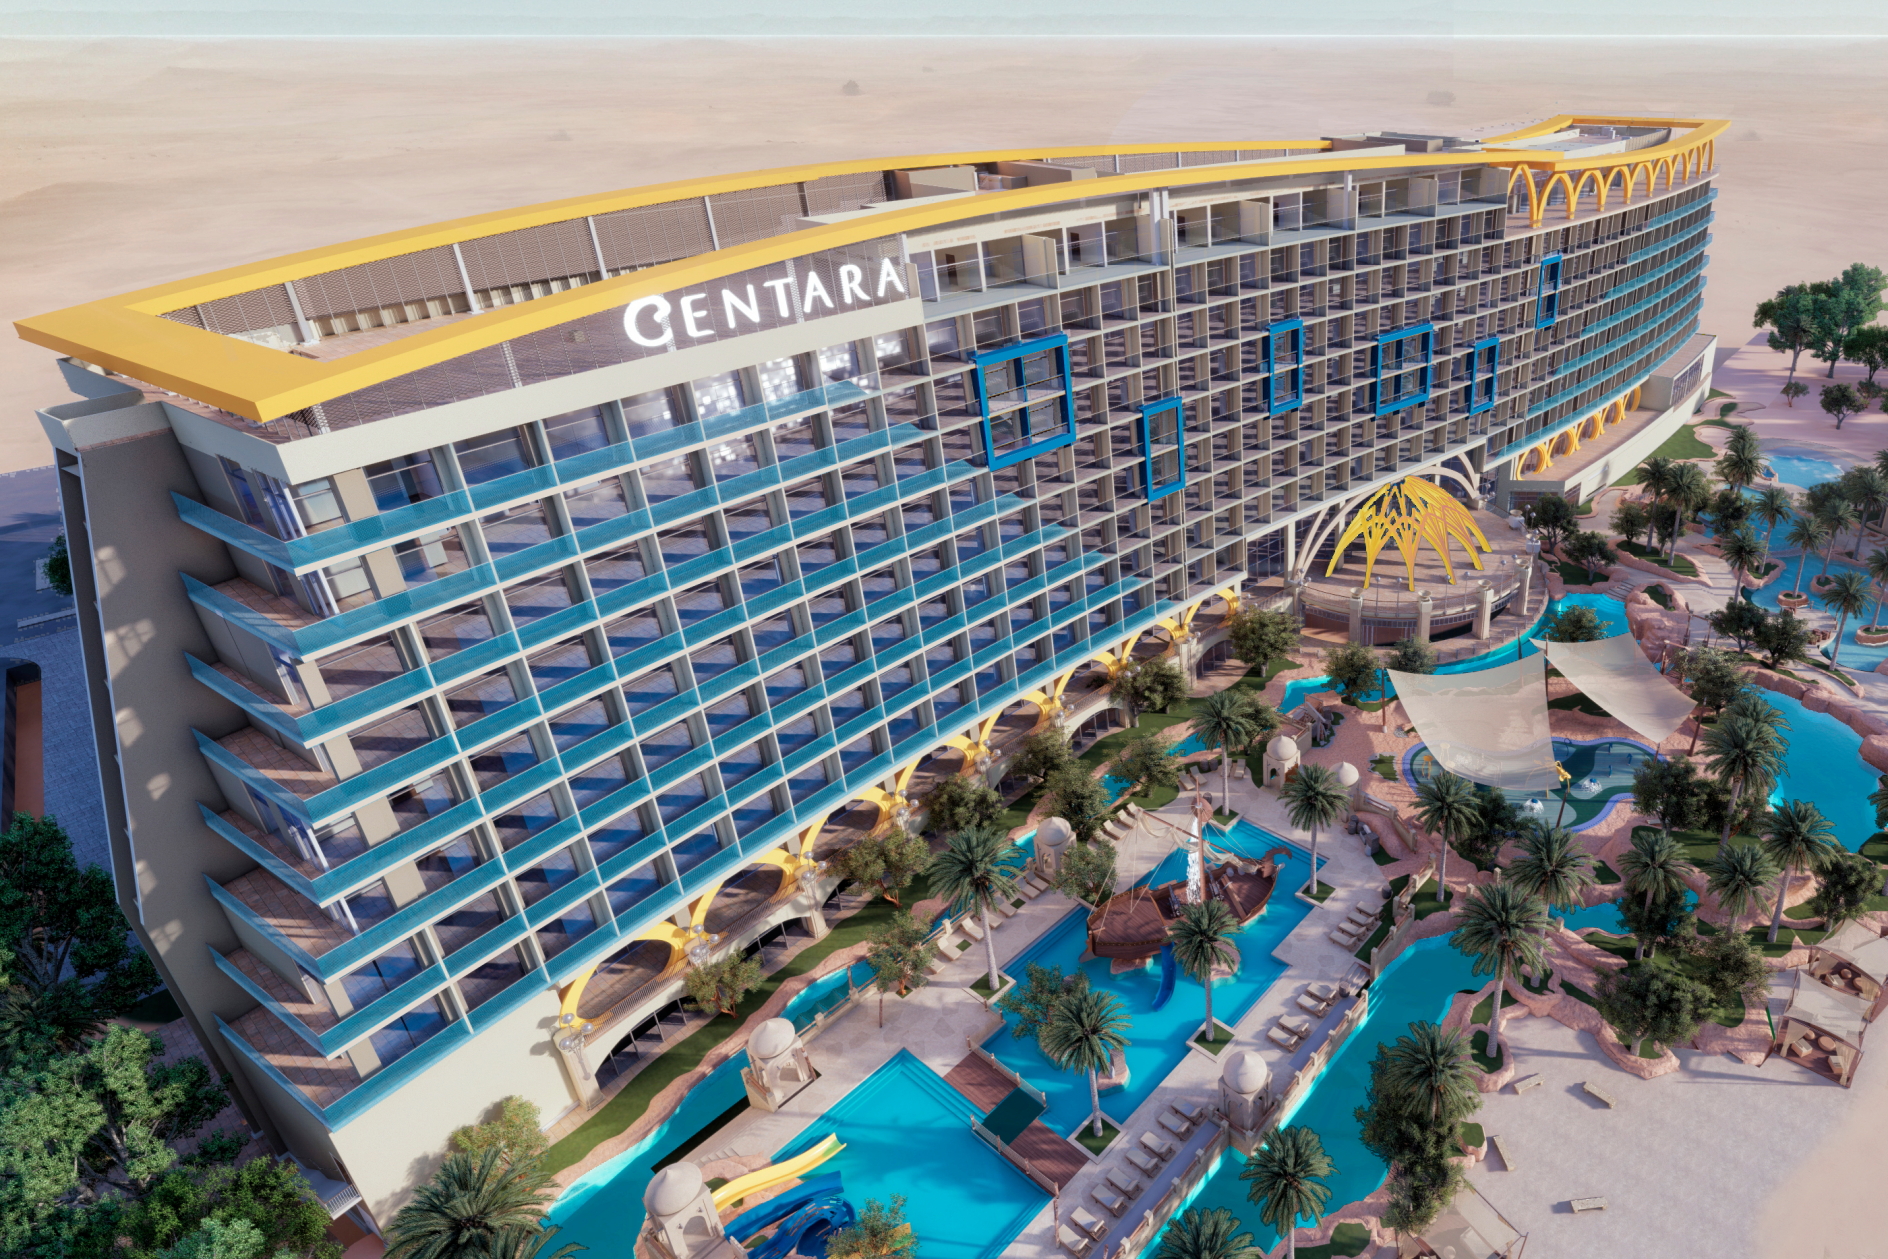 The 607-room Centara Mirage Beach Resort Dubai is scheduled to open on 14 October 2021. Click to enlarge.